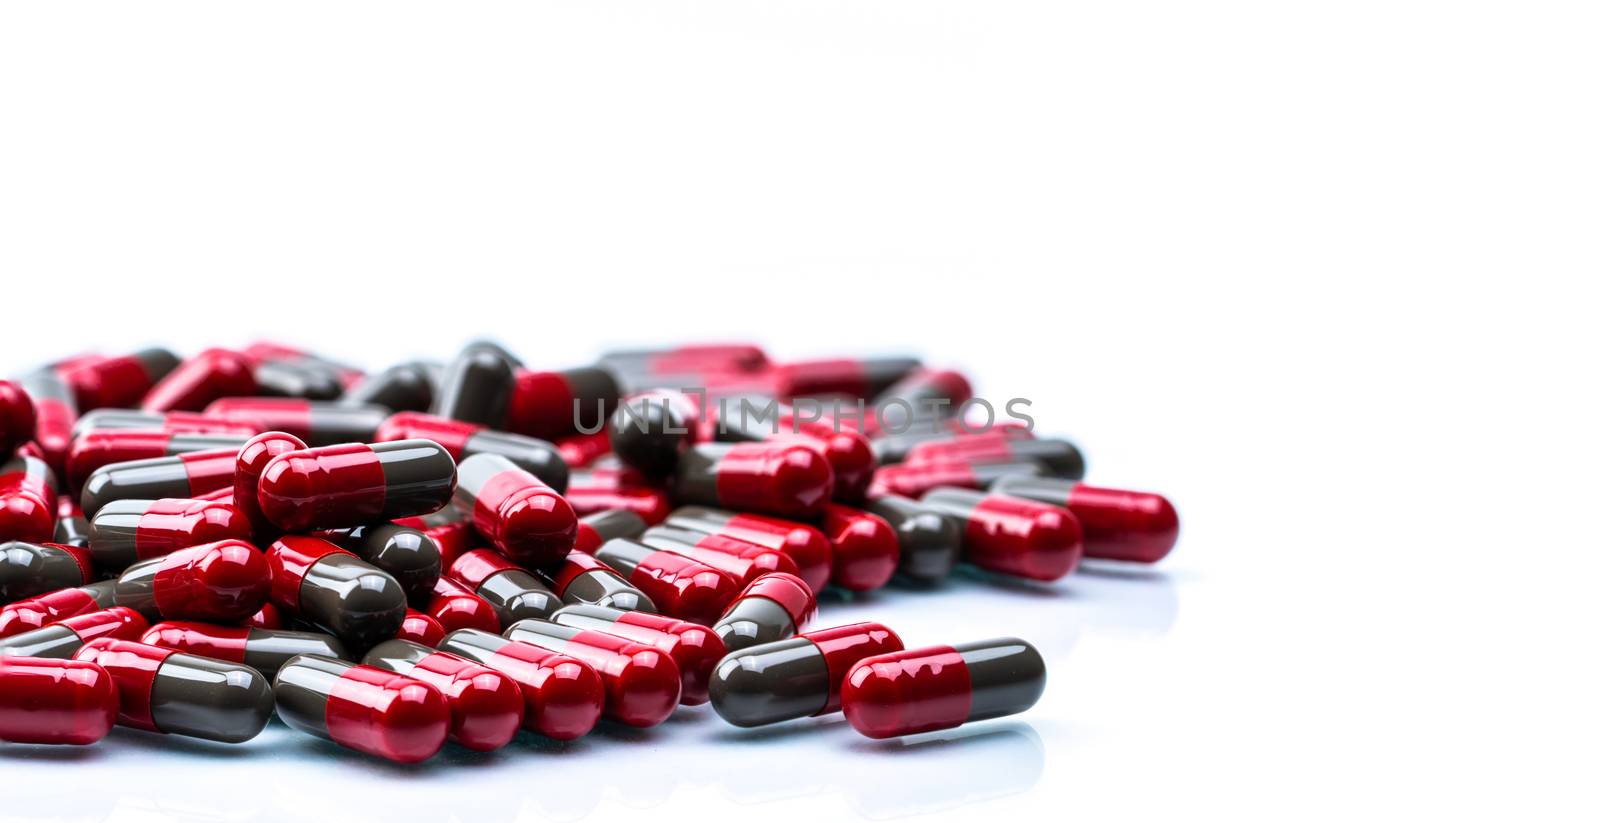 Pile of red and grey capsule pills isolated on white background with copy space. Flunarizine : drug for migraine prophylaxis treatment. Global healthcare concept. Pharmaceutical industry by Fahroni